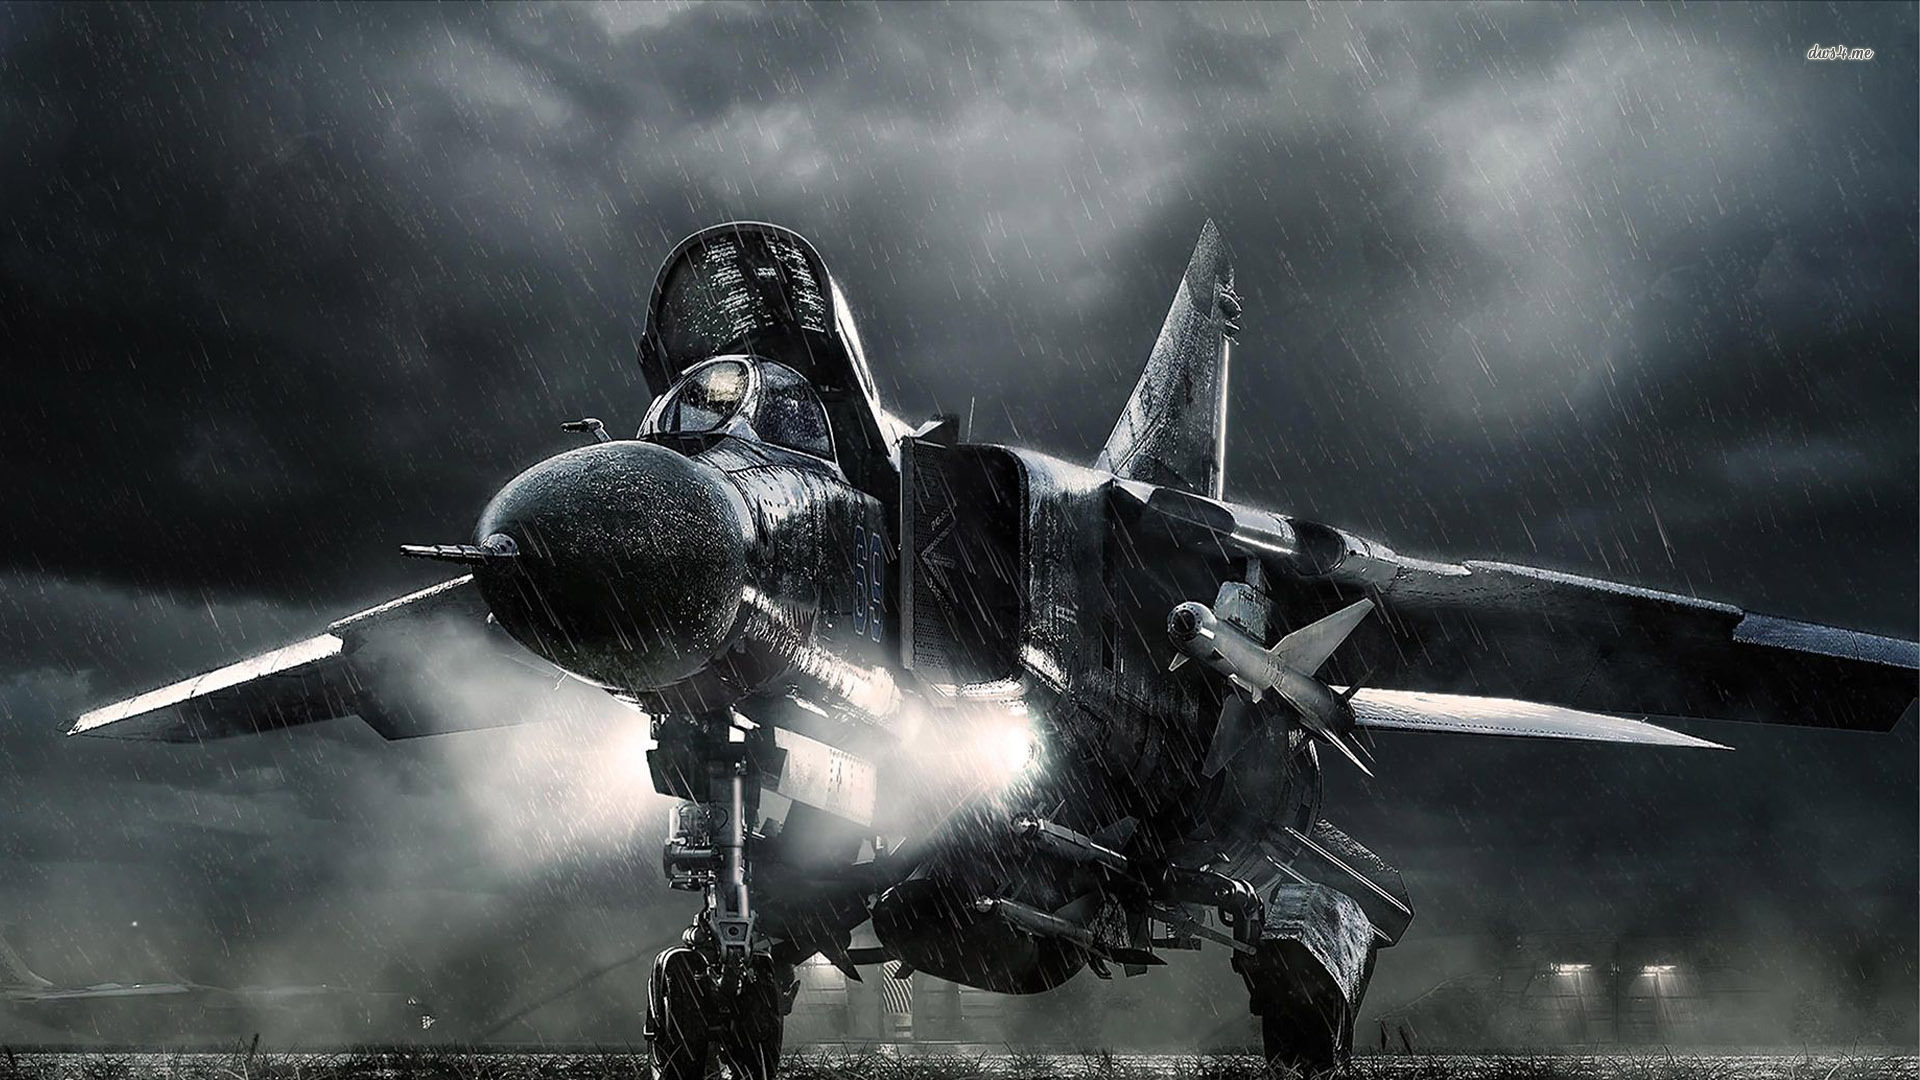 Military Mikoyan-Gurevich Mig-23 HD Wallpaper | Background Image